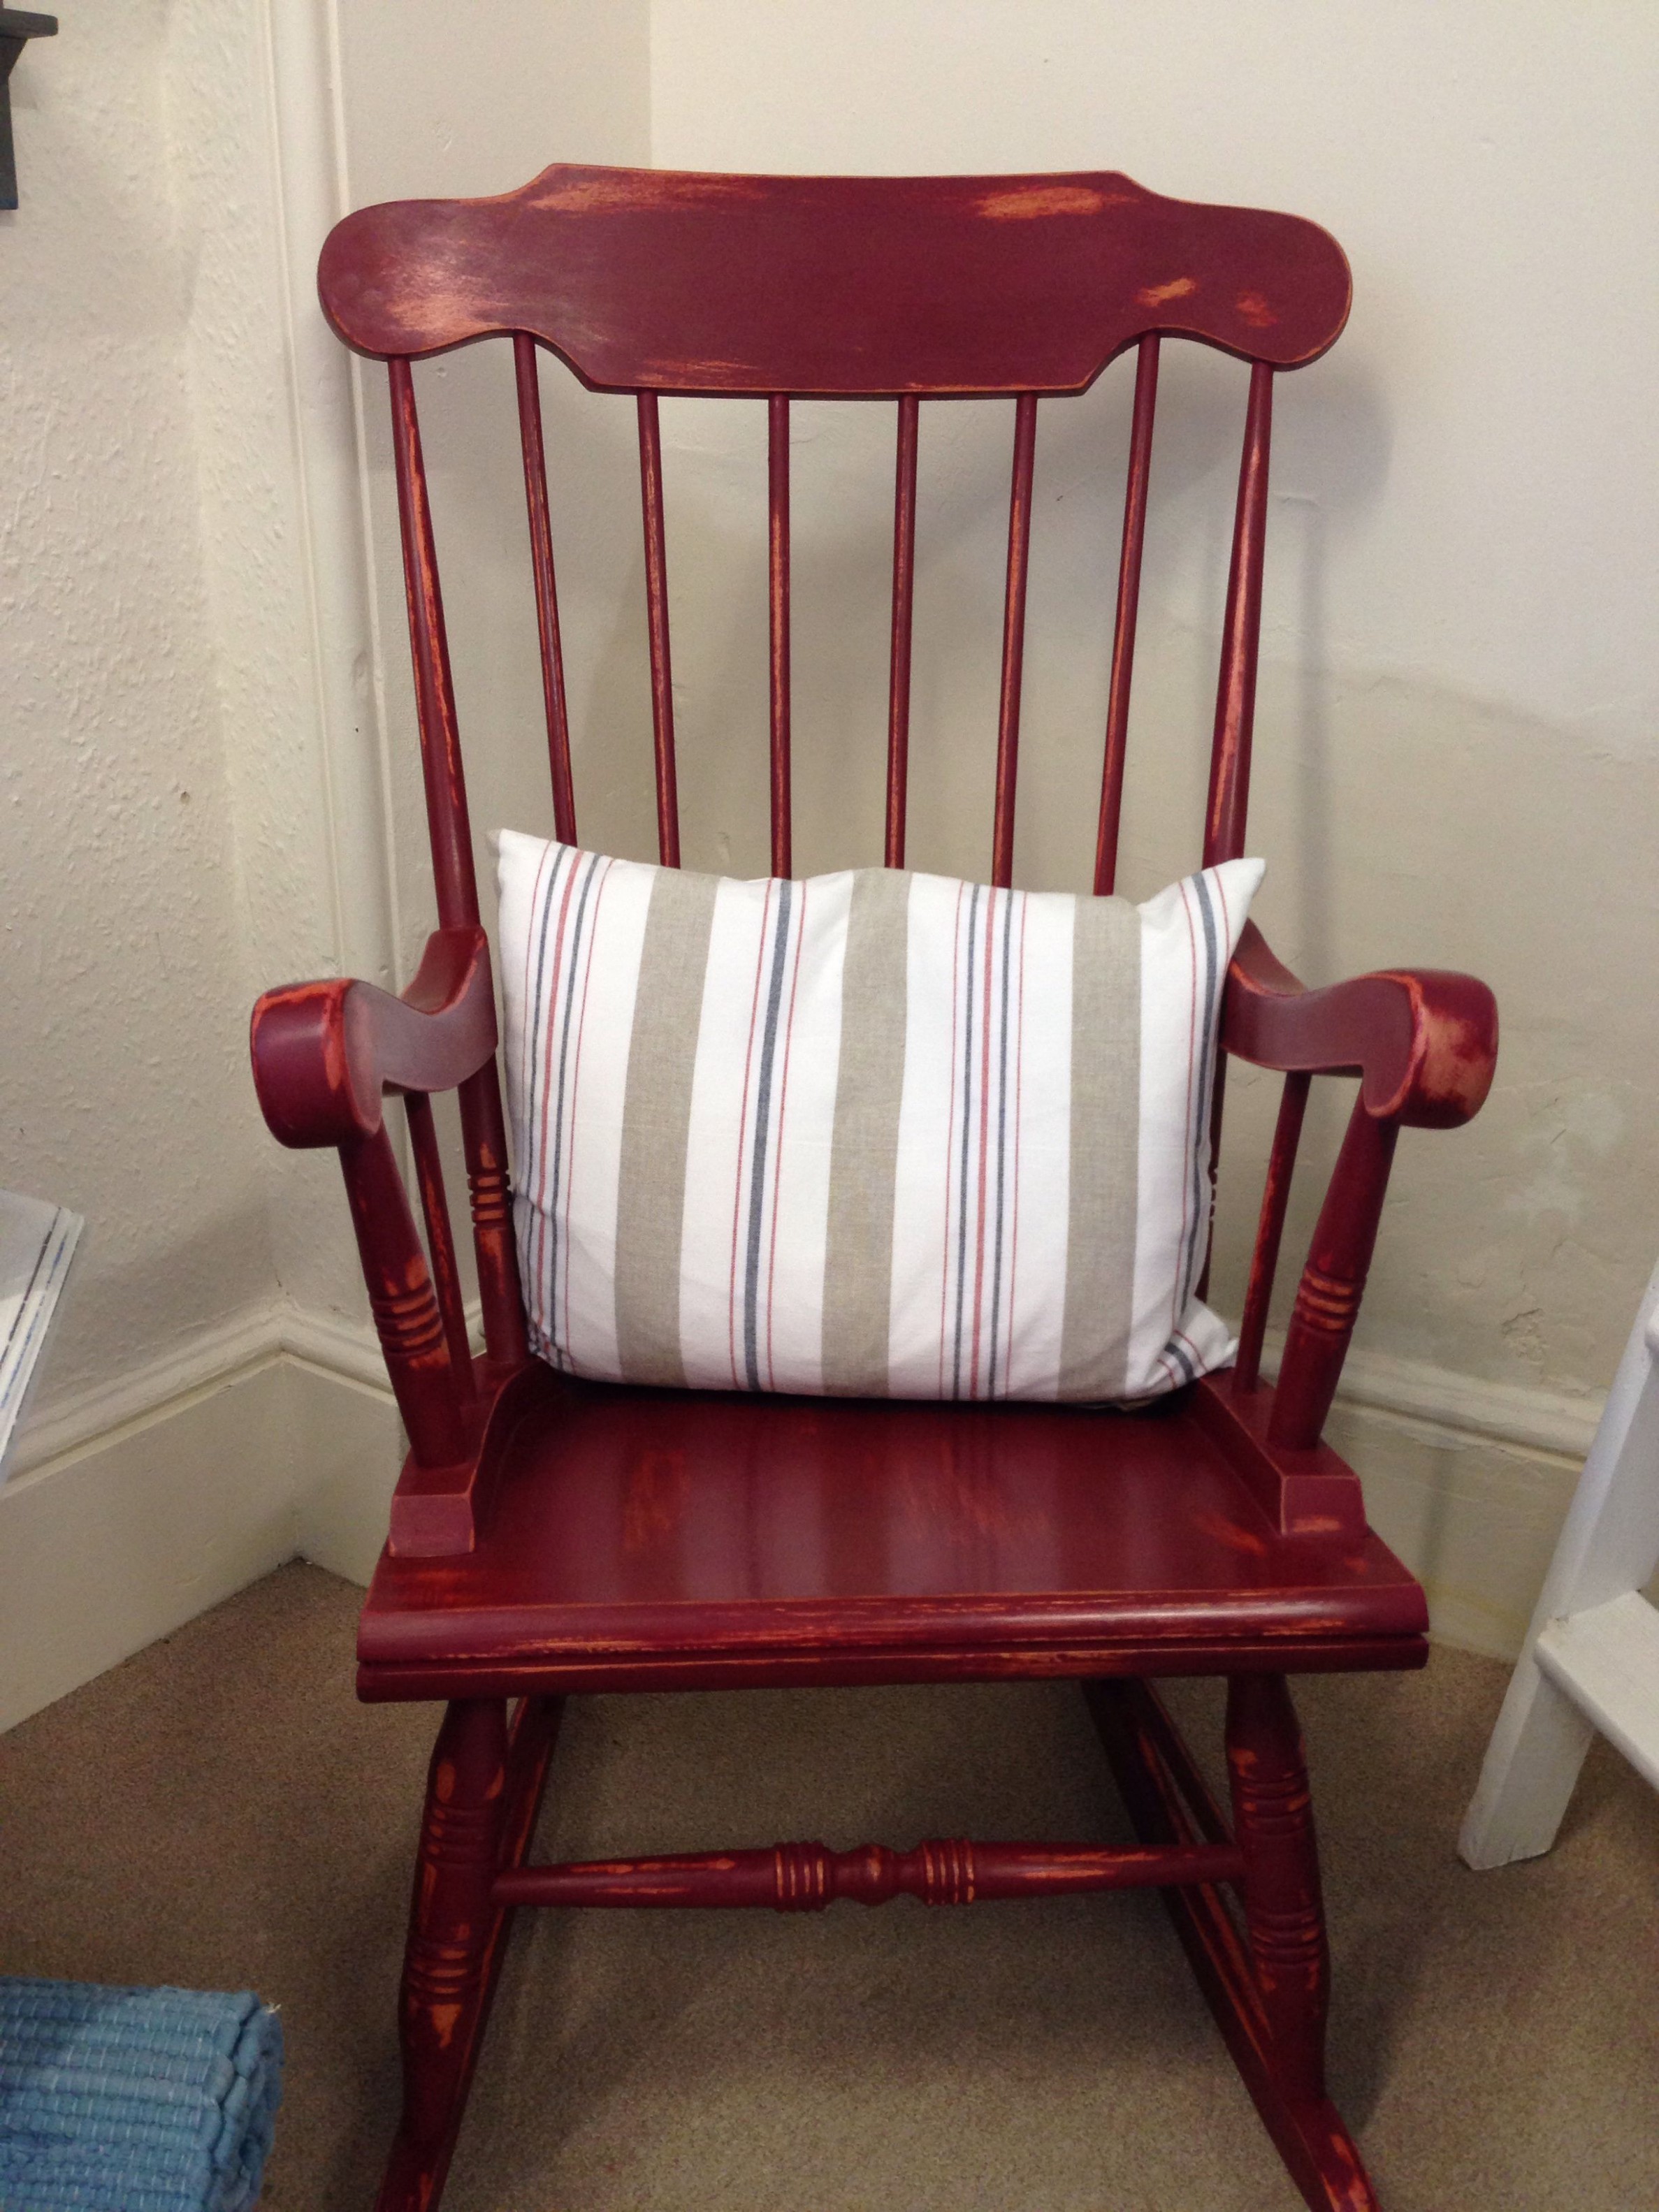 Rocking Chair In Annie Sloan Burgundy Chalk Paint™ (with Images ..